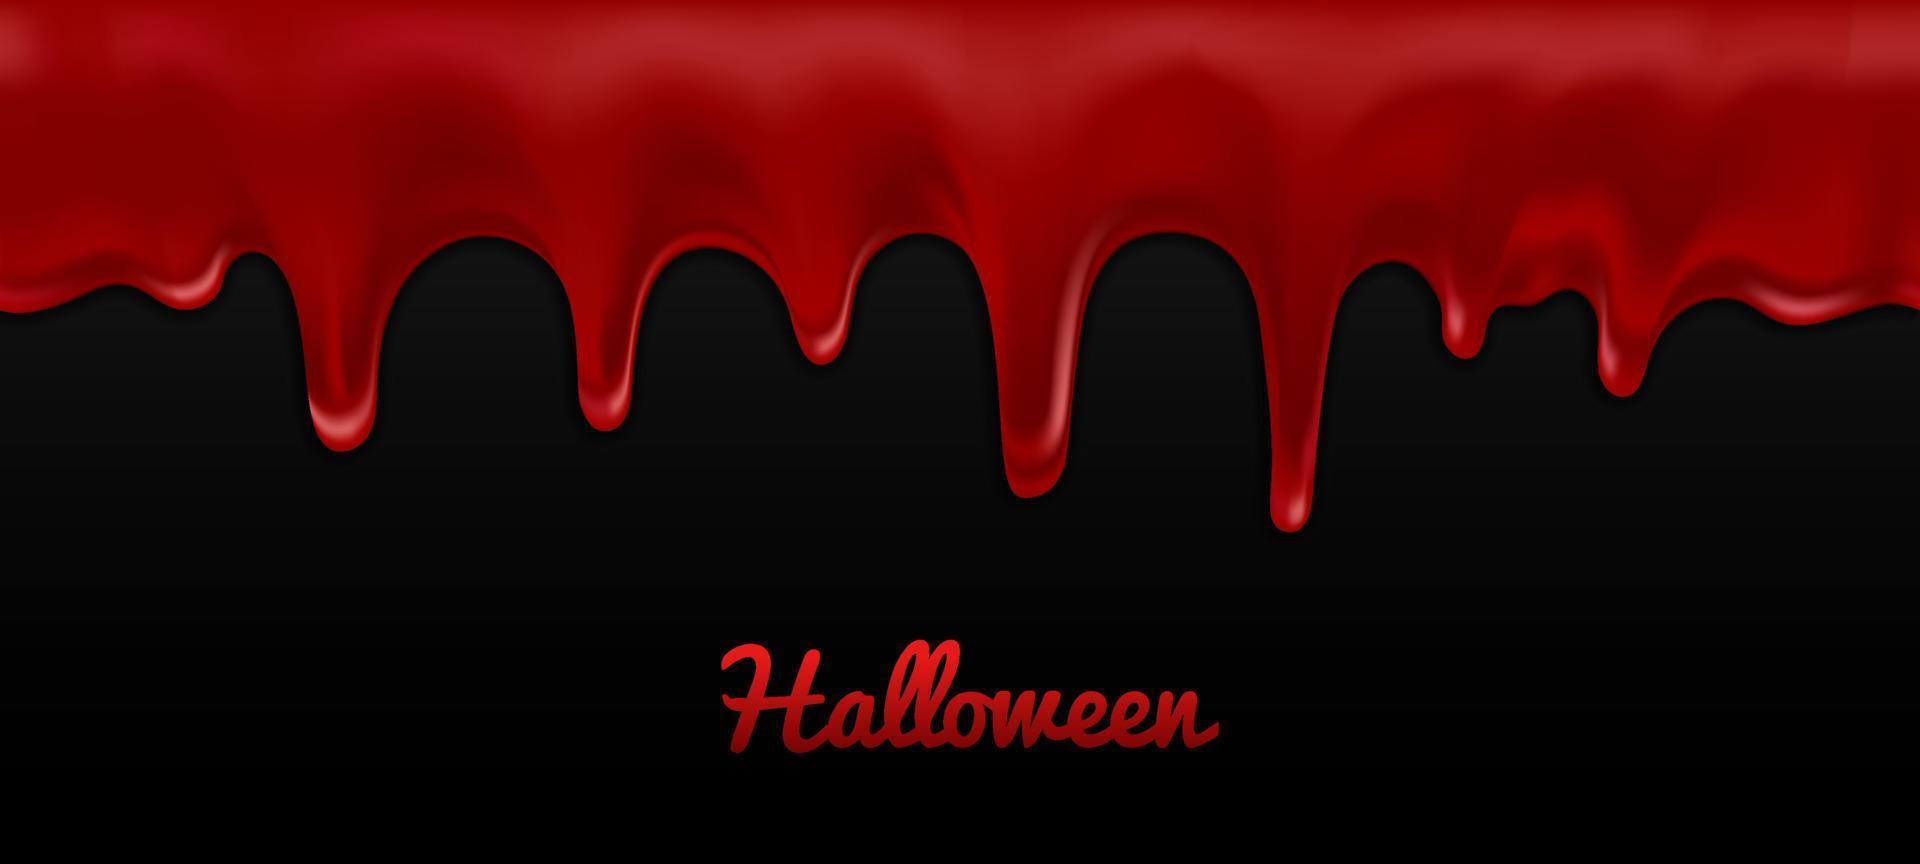 Realistic blood flowing isolated on black background. Drops and liquid splashes. Can be used on medical, halloween scary party, medical, flyers, banners or web. Vector illustration